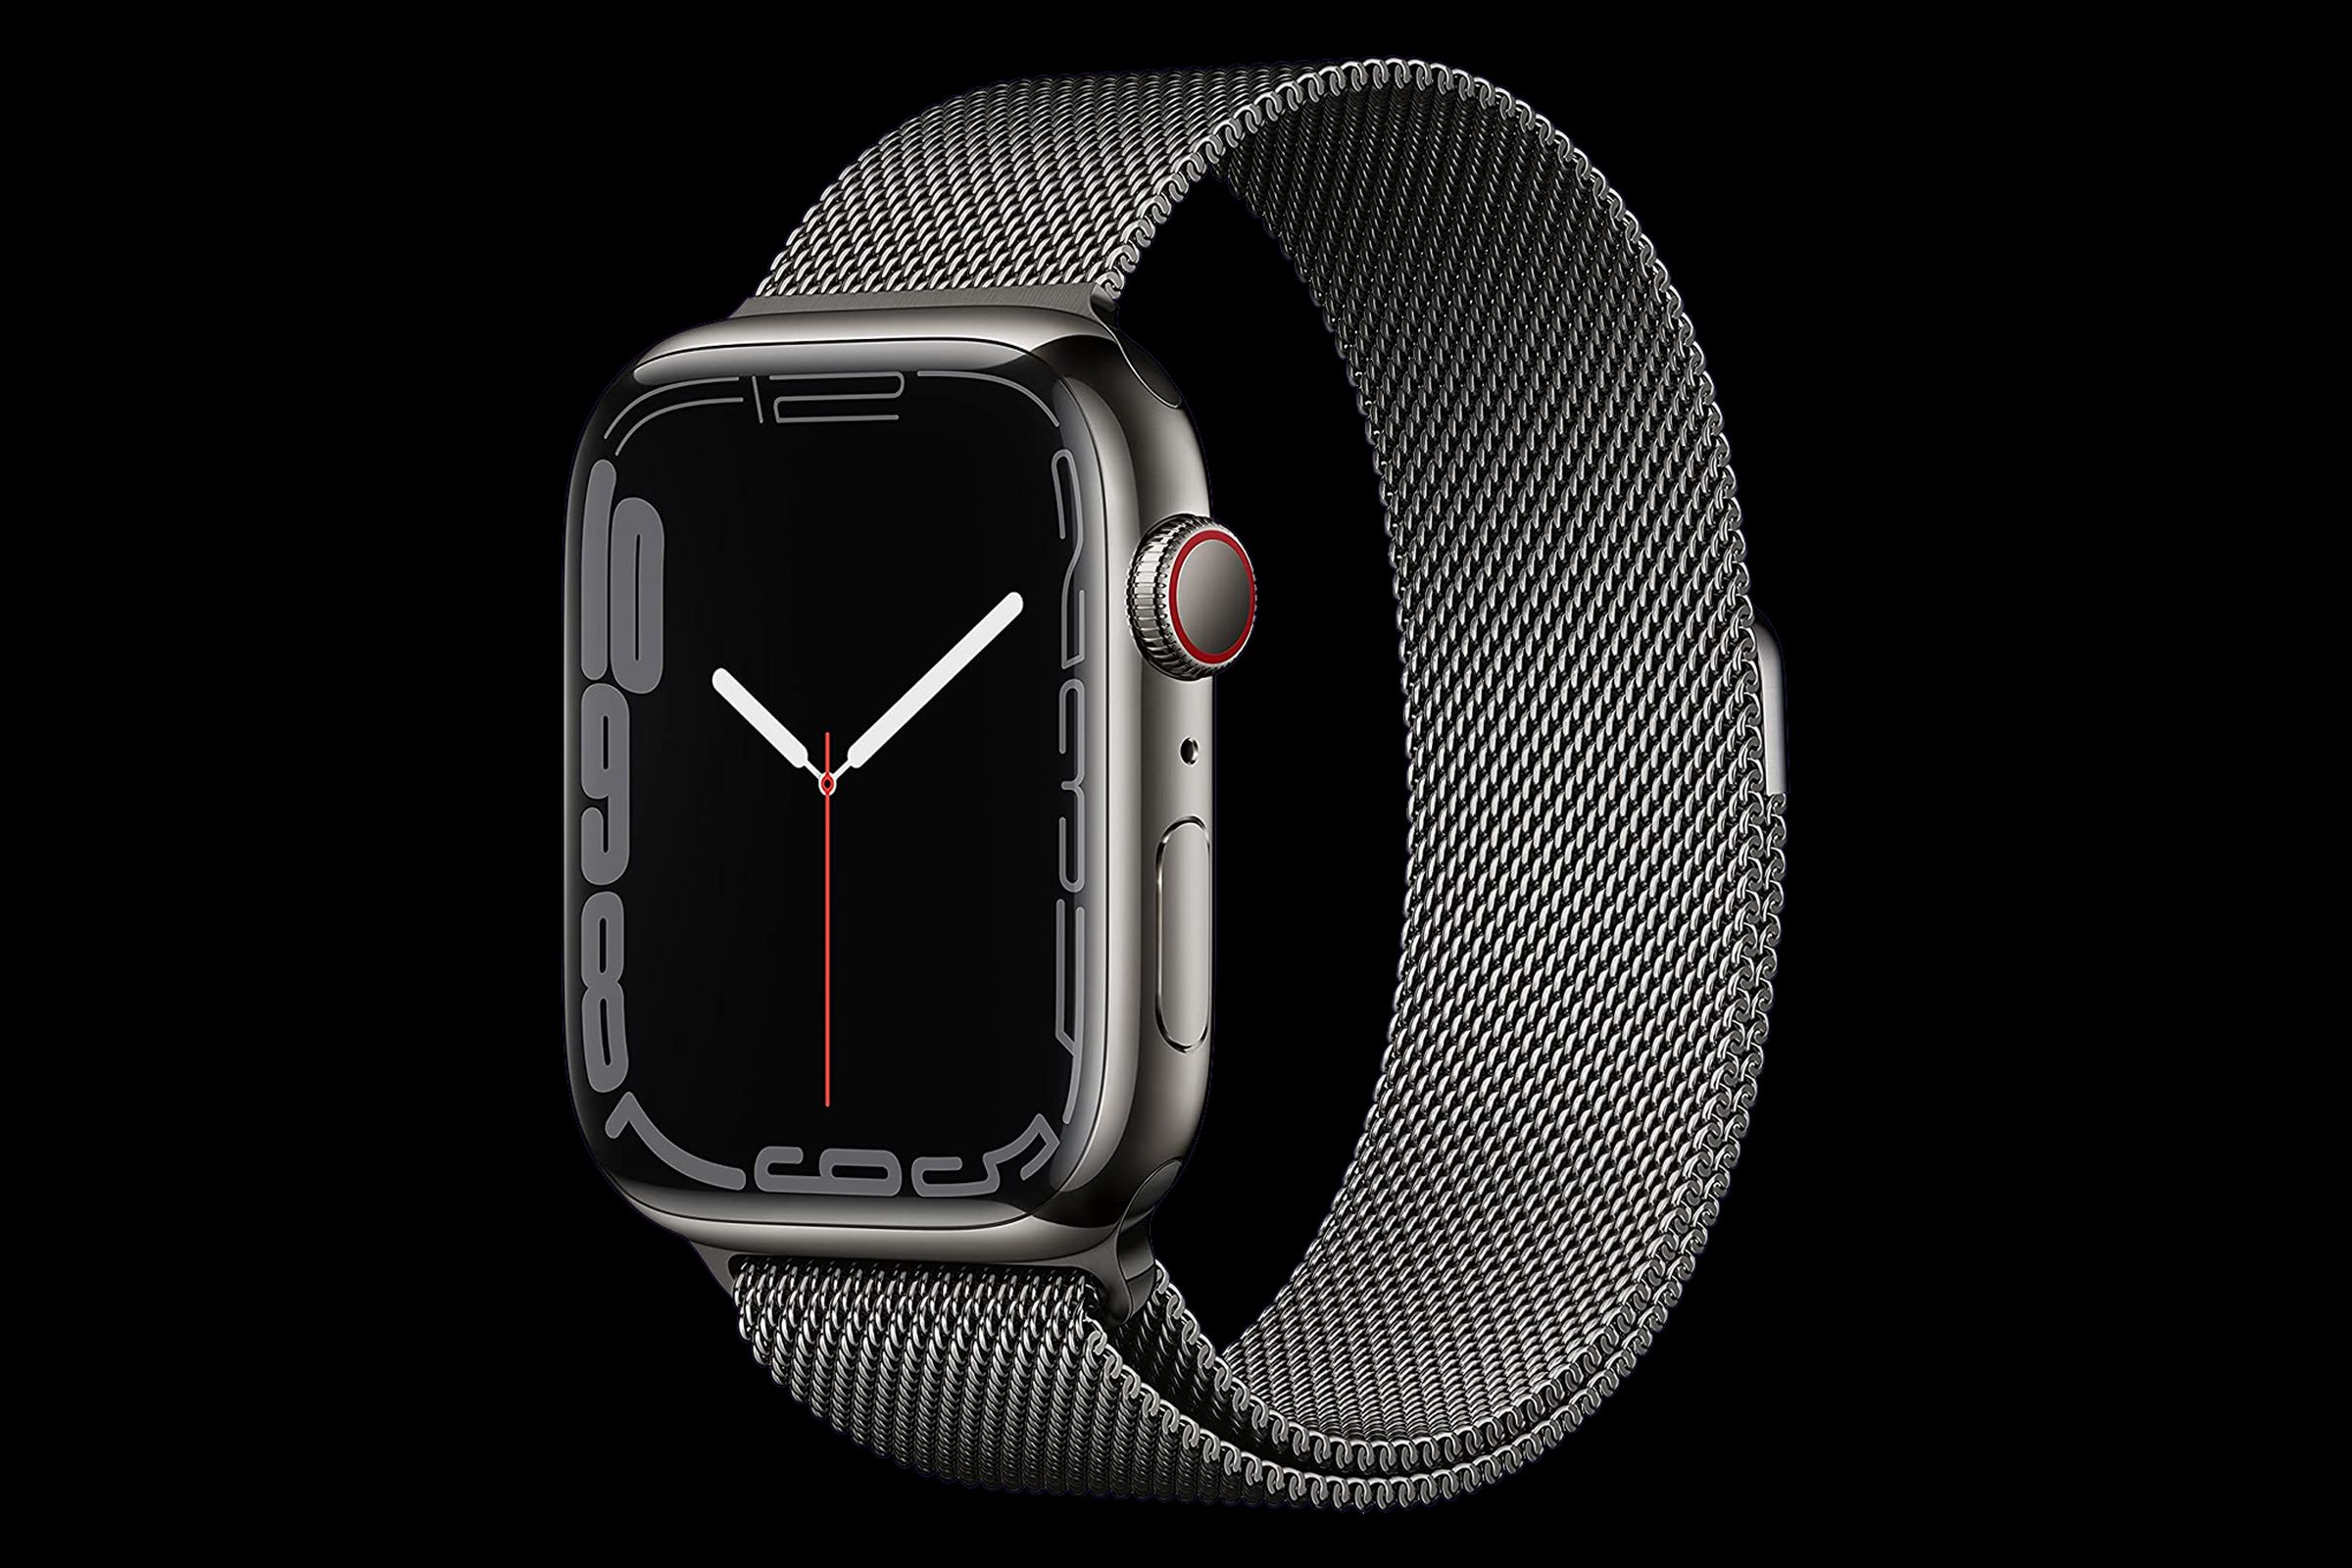 The graphite stainless steel Apple Watch Series 7 on a black background.